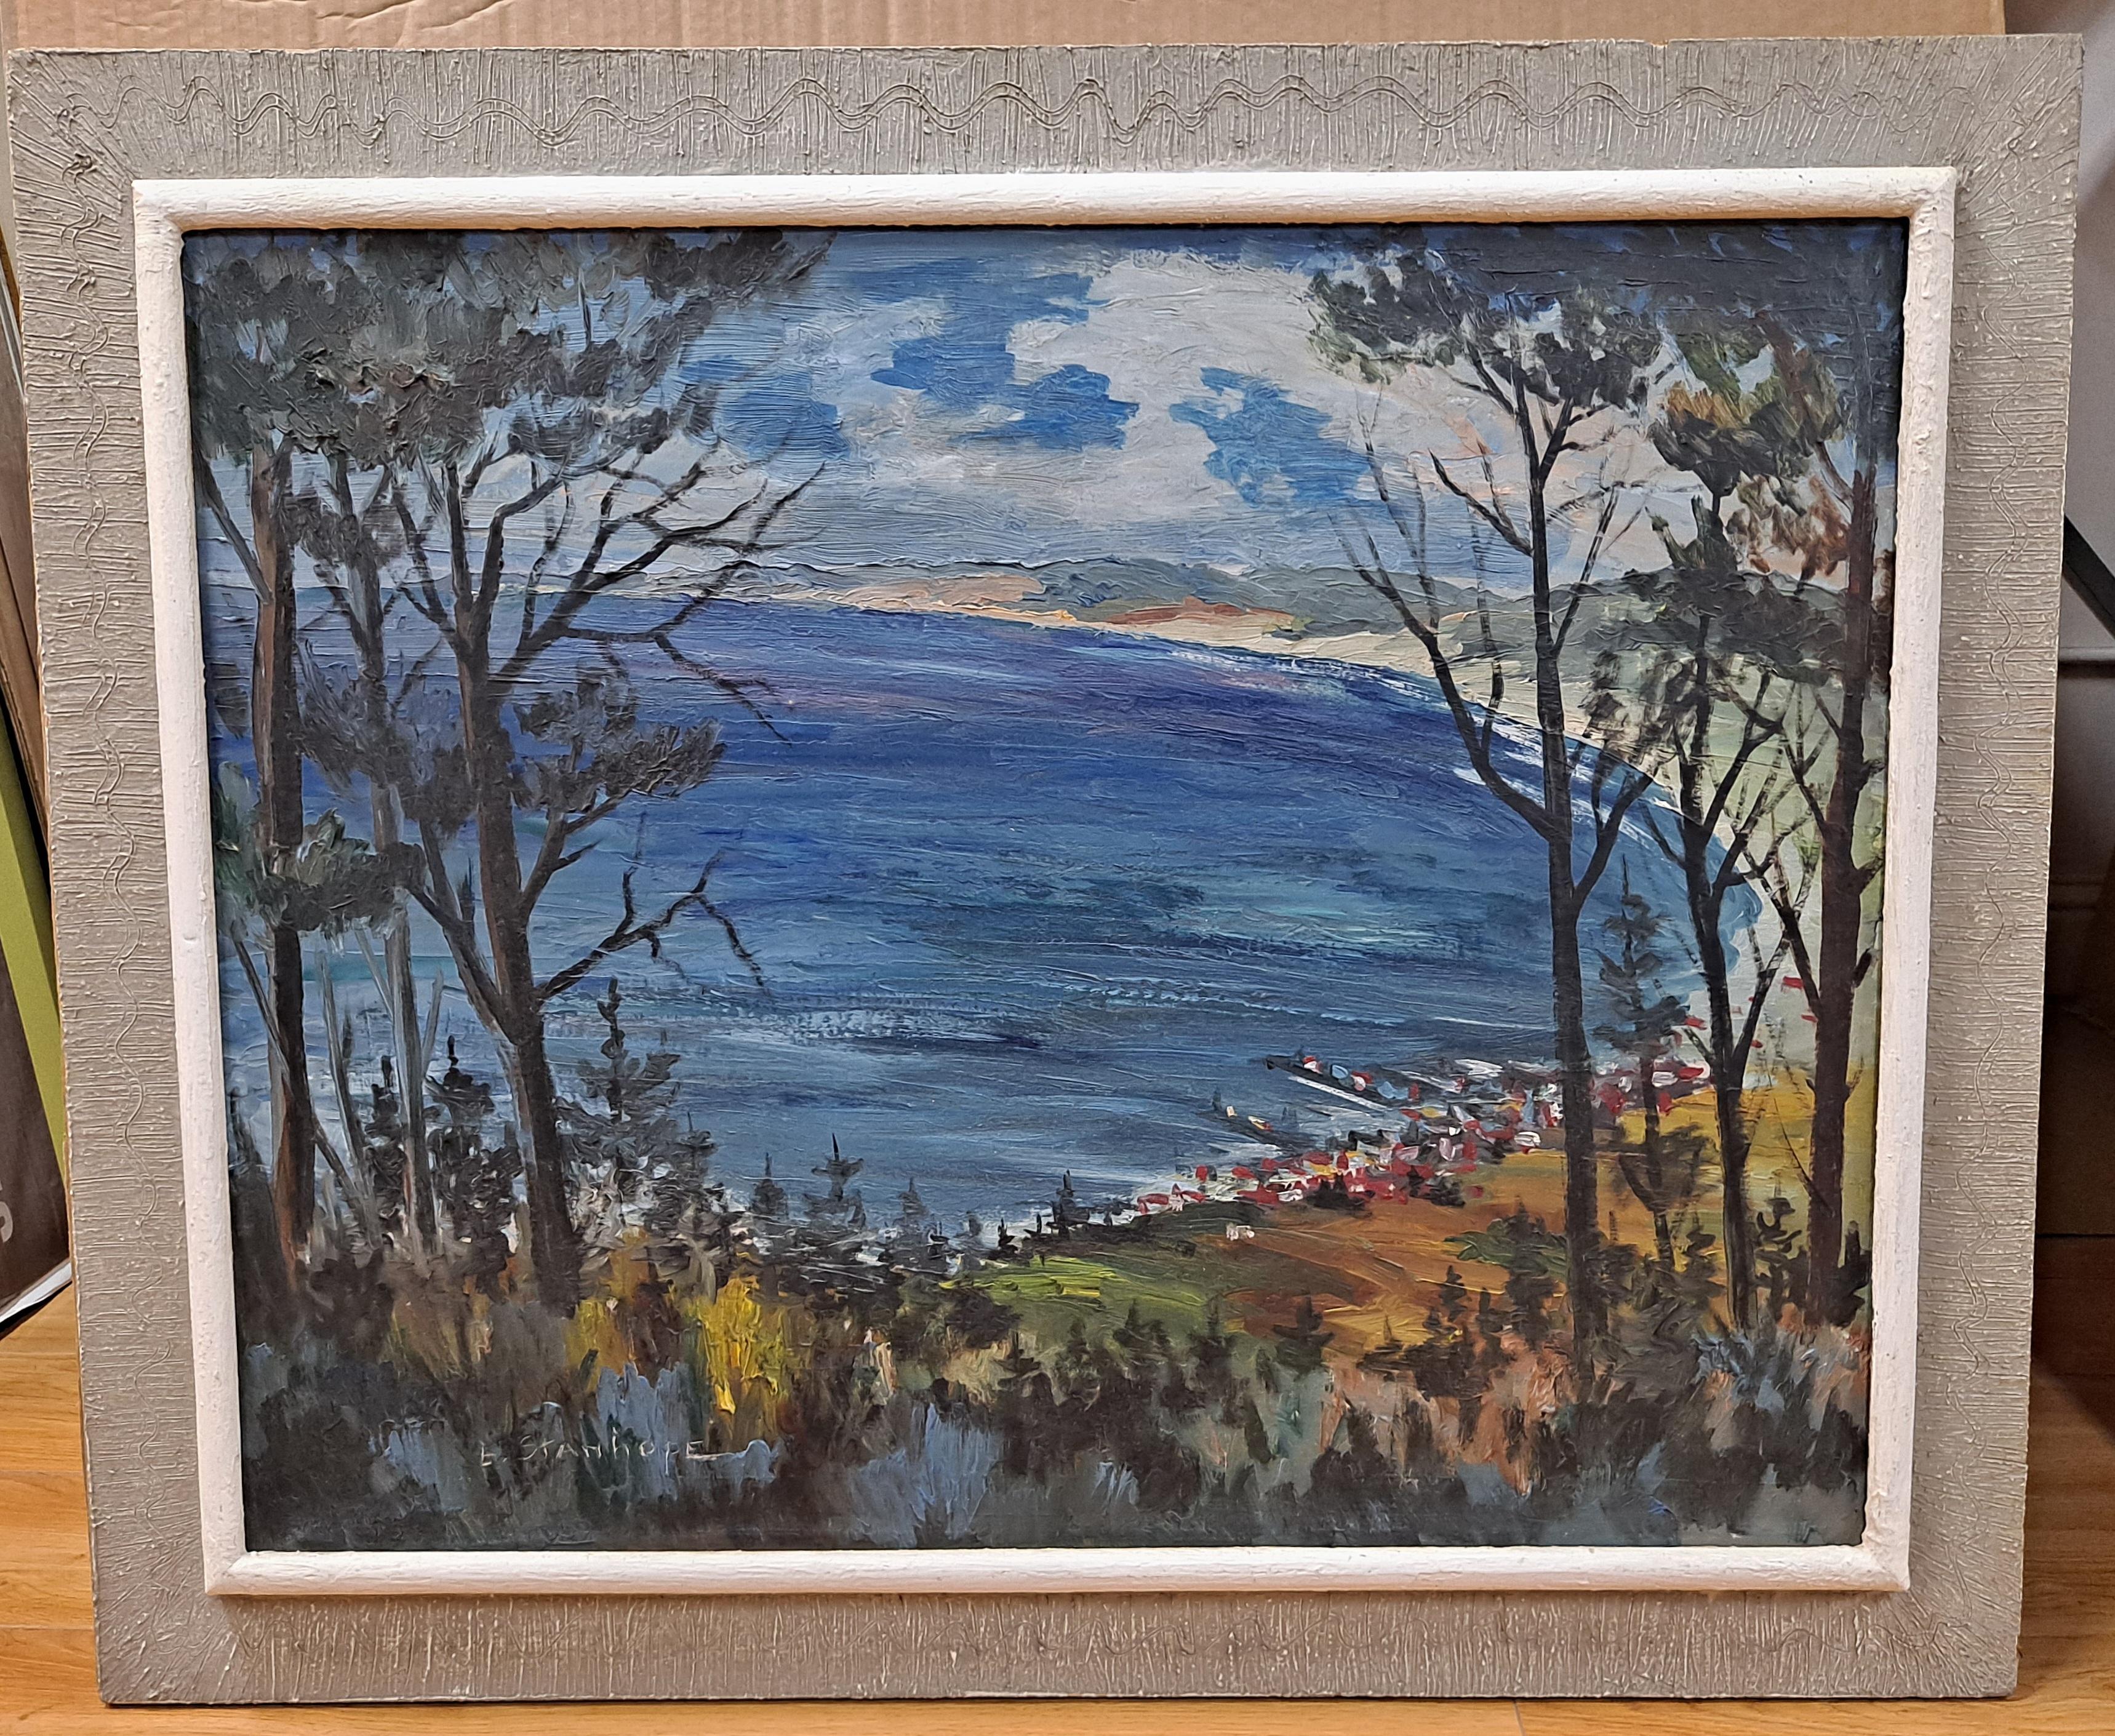 Beautiful 1940's impressionist landscape by Elmer Stanhope (1907-1956)
Titled "Monterey Bay"
Oil on canvas
The canvas measures 24" x 30", while the frame measures 30" x 36"